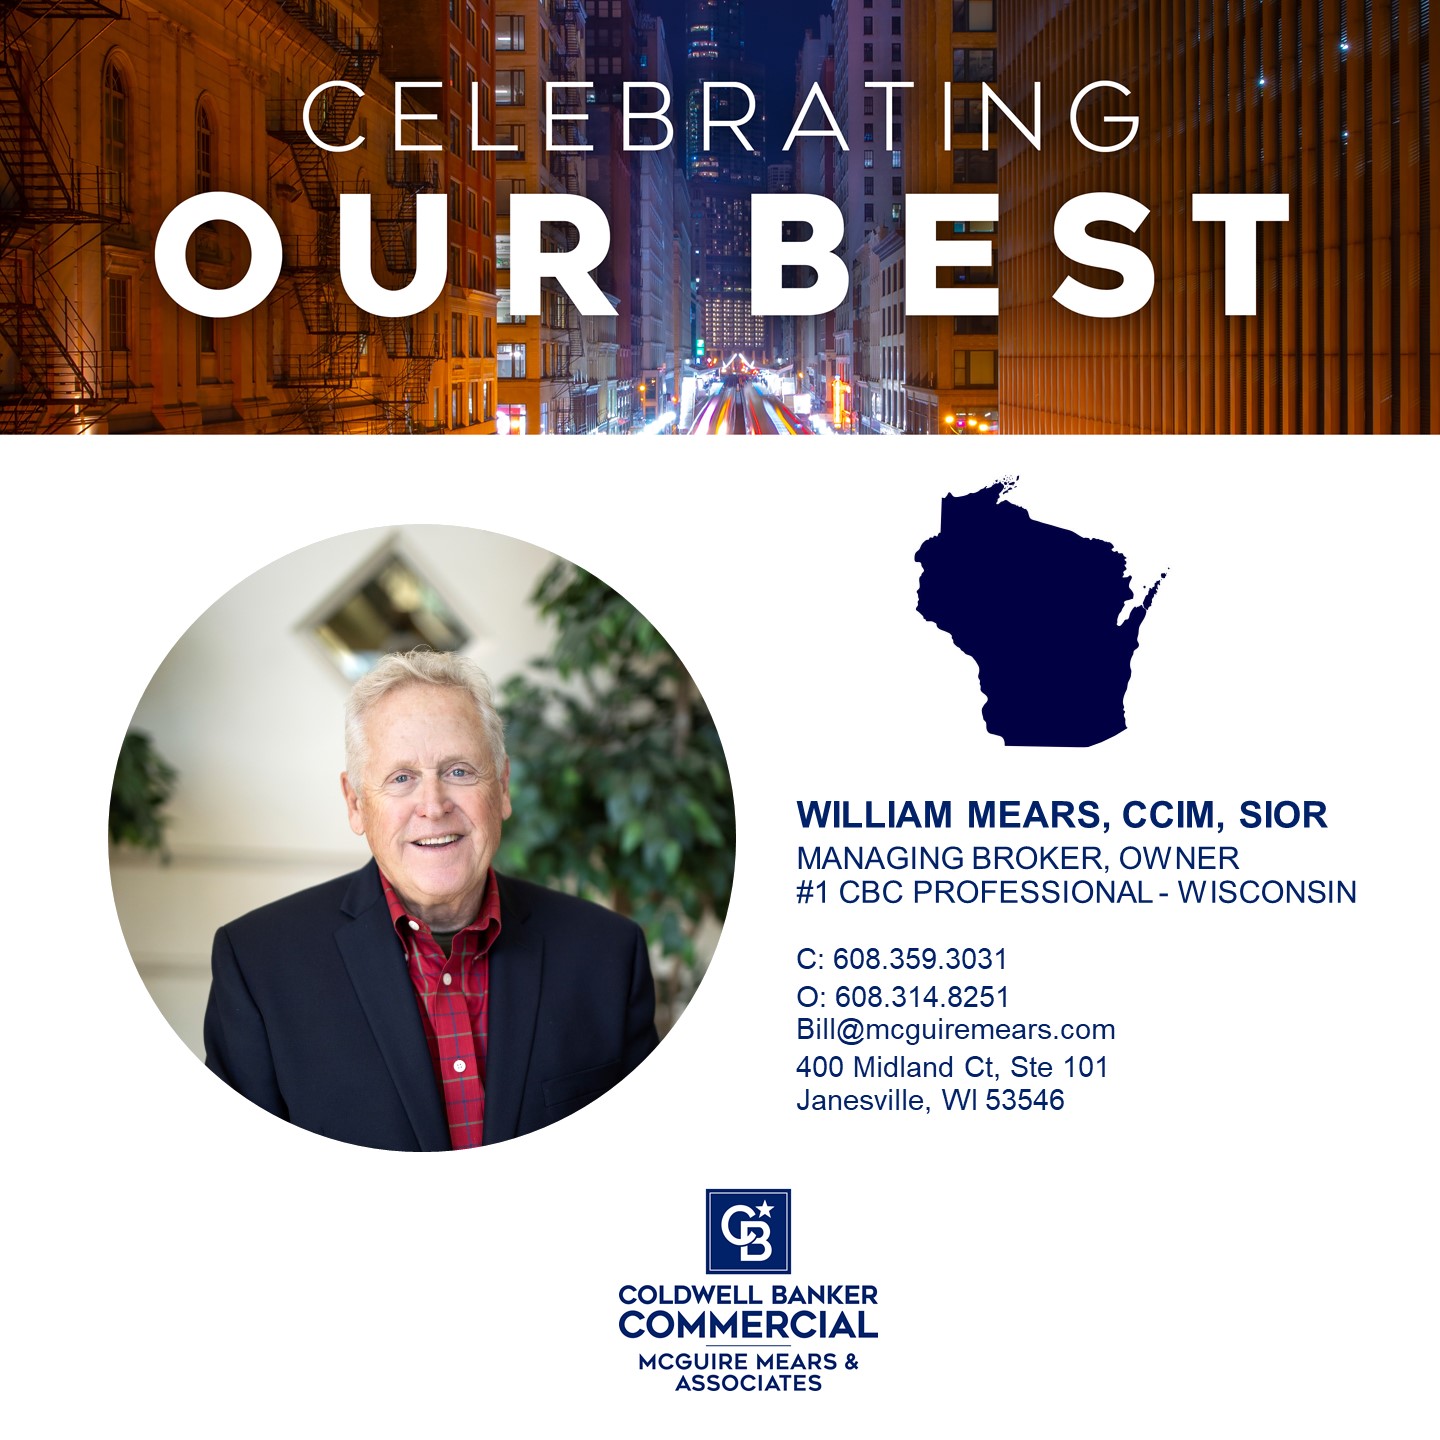 Bill Mears Earns Number One Coldwell Banker Commercial Professional Award in Wisconsin